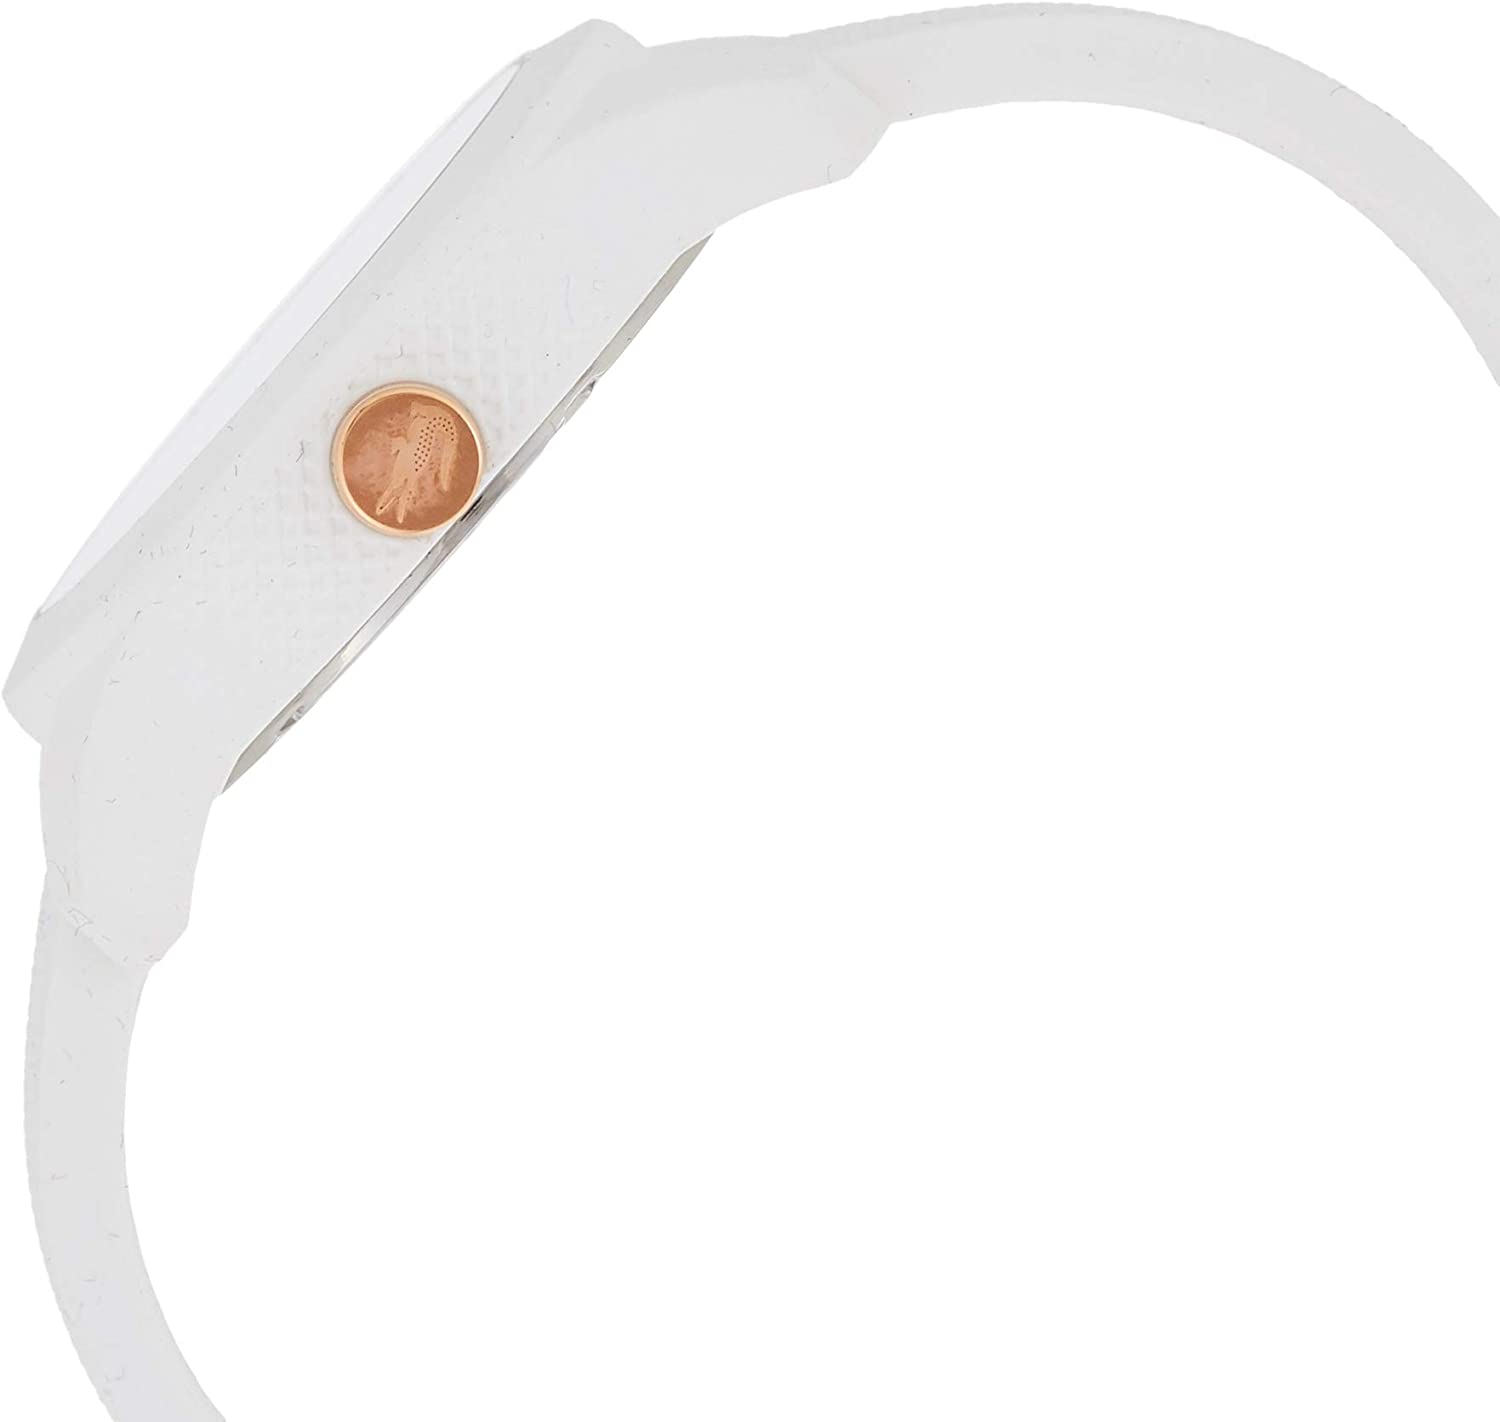 Lacoste Women's Ladies 12.12 Stainless Steel Quartz Watch with Silicone Strap, White, 17 (Model: 2000960)